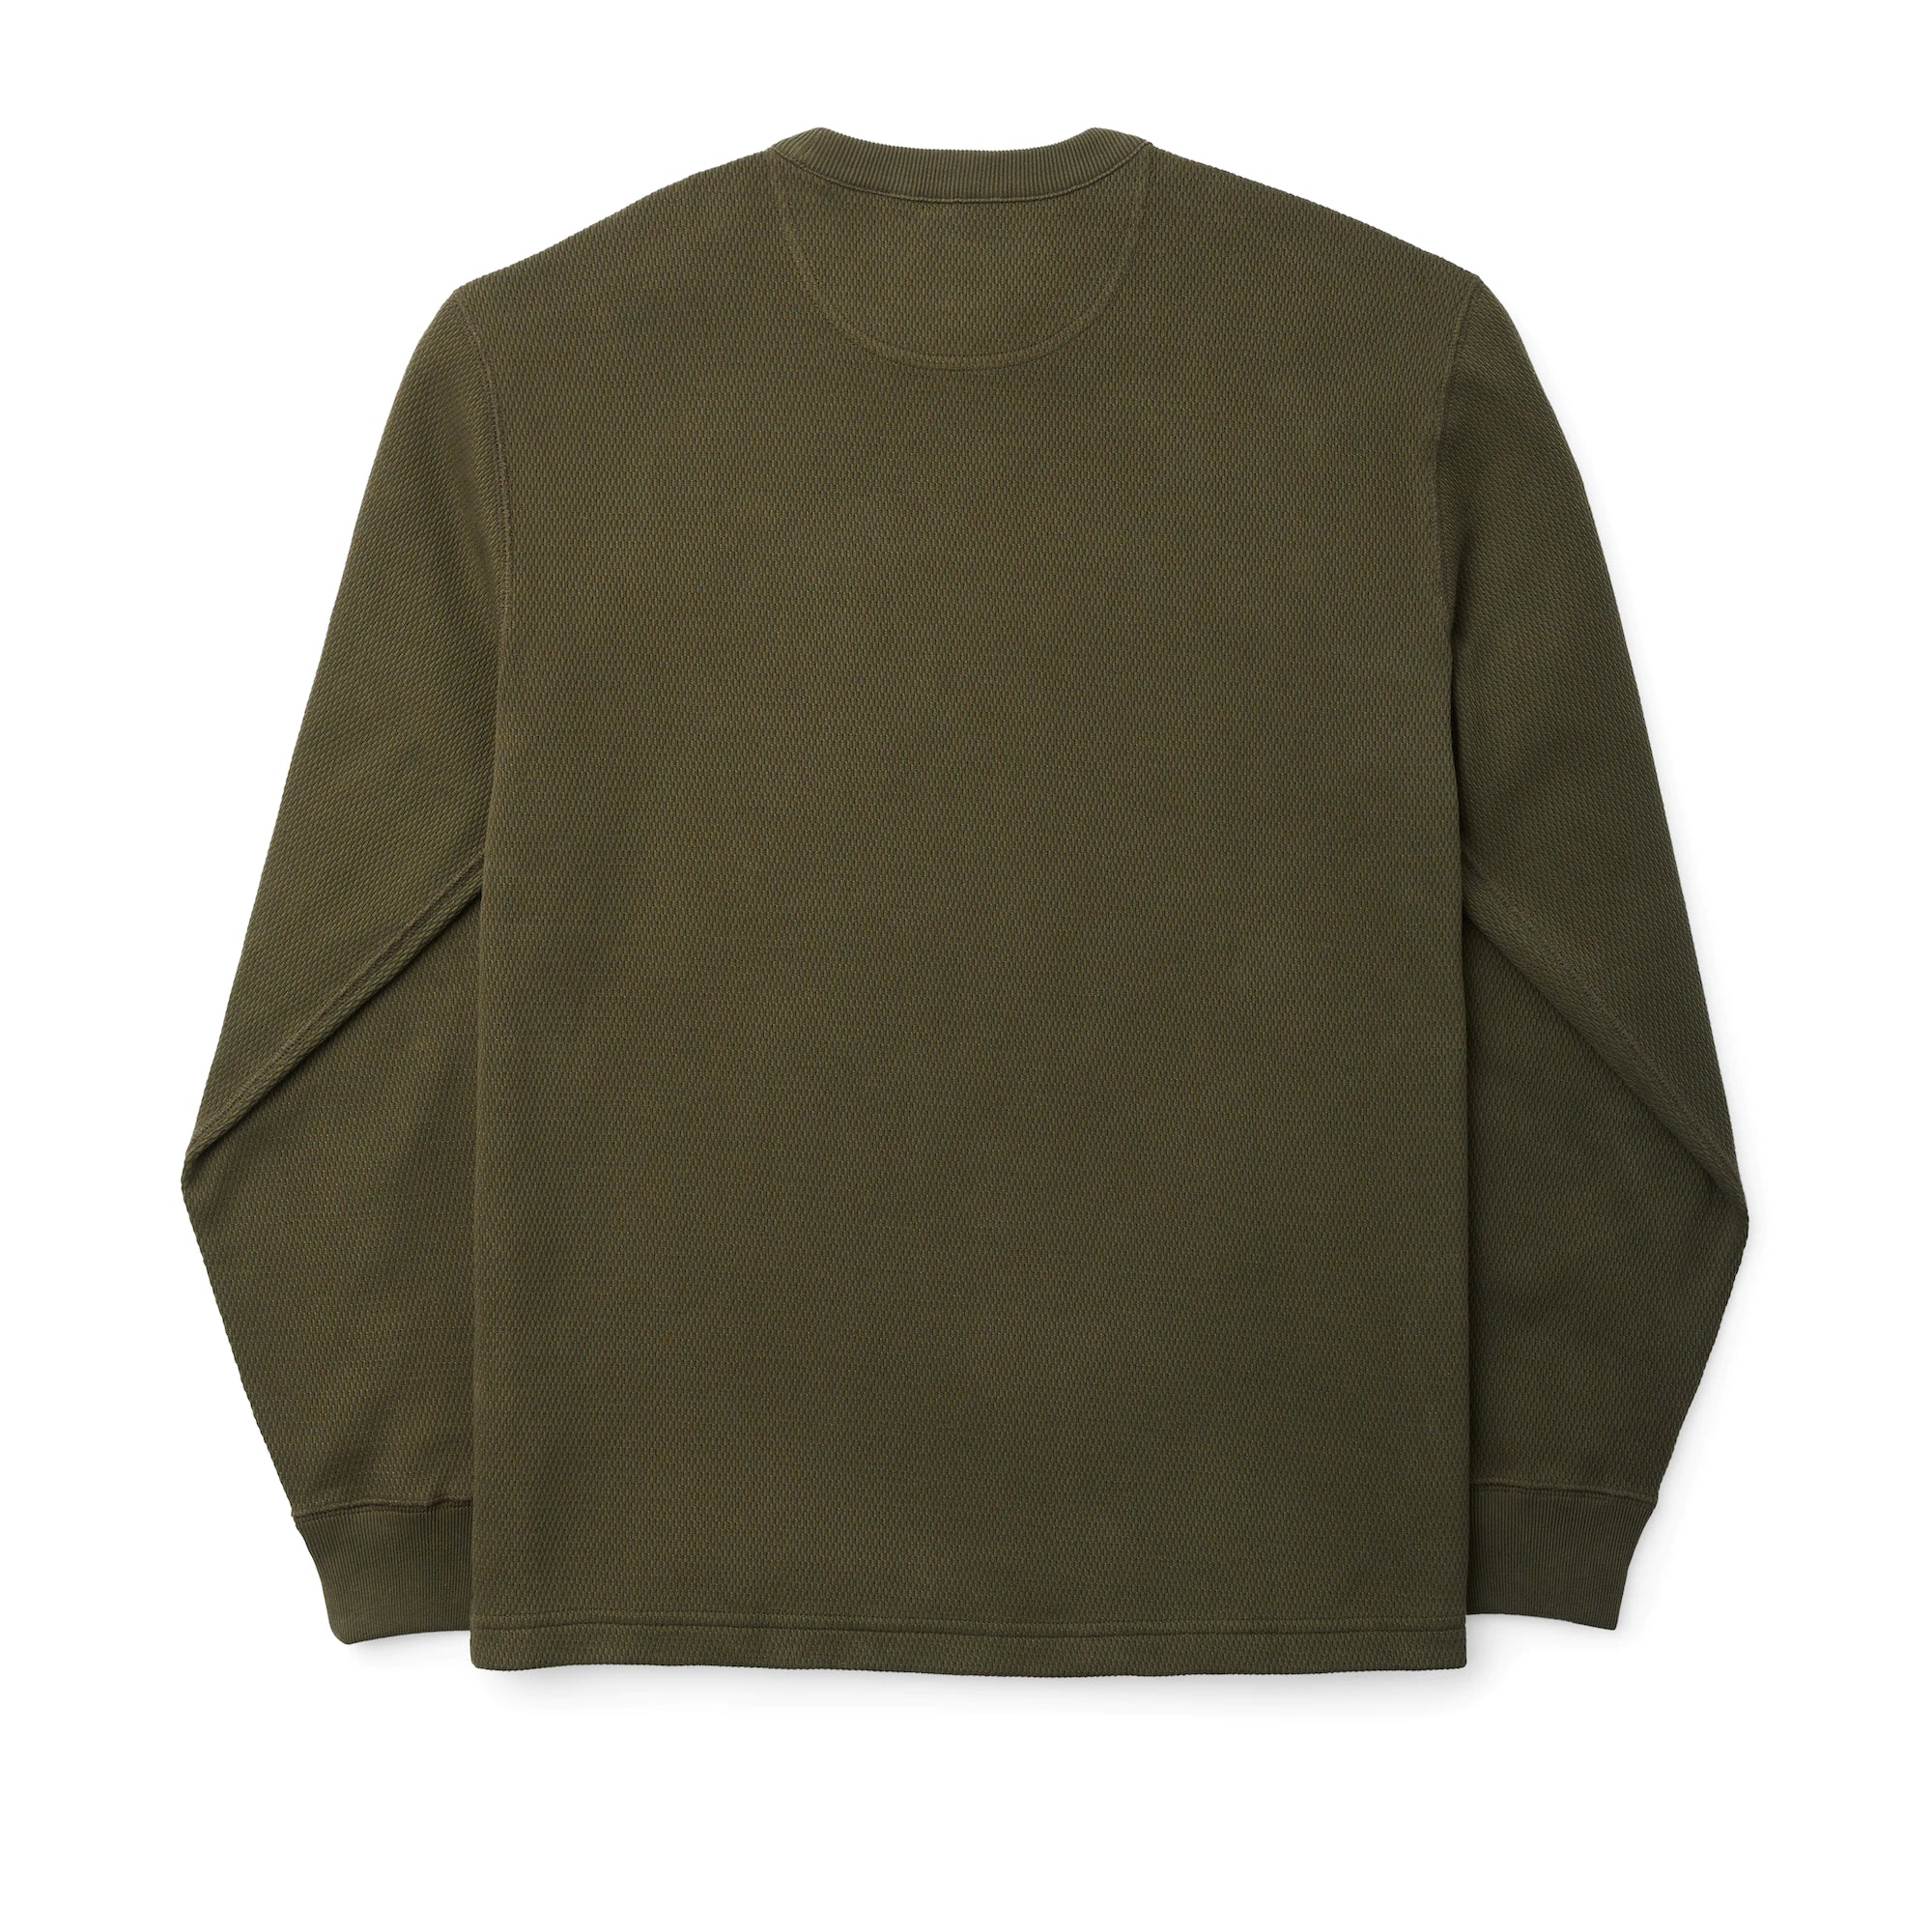 Waffle Knit Thermal Crew "Mossy Rock"